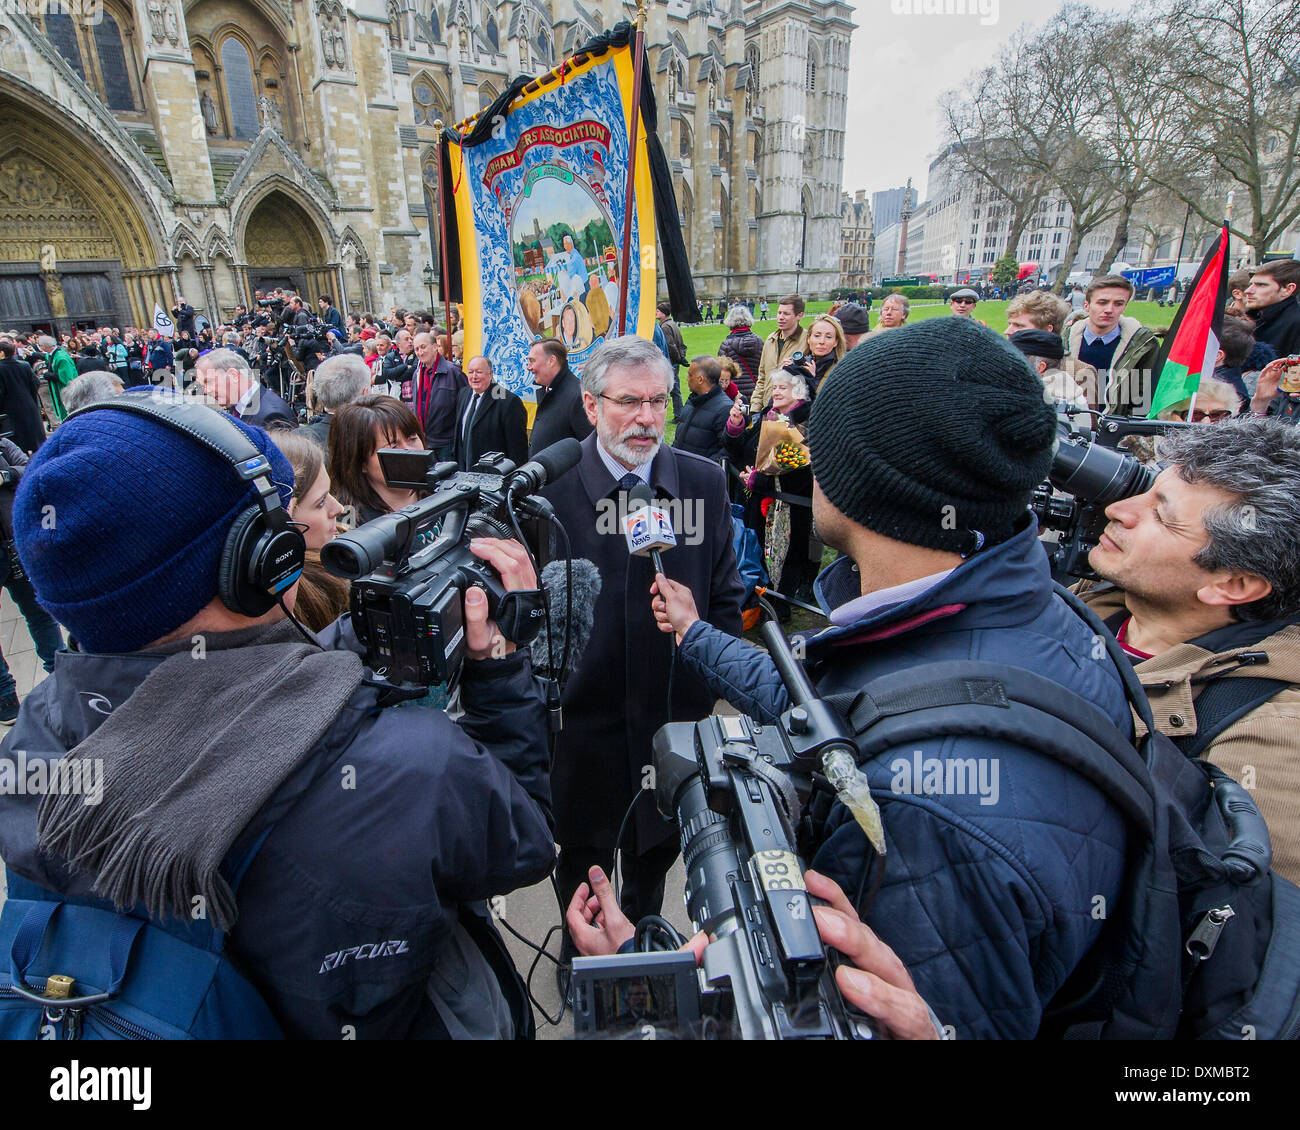 London, UK . 27th Mar, 2014. Gerry Adams. Tony Benn's funeral at 11.00am at St Margaret's Church, Westminster. His body was brought in a hearse from the main gates of New Palace Yard at 10.45am, and was followed by members of his family on foot. The rout was lined by admirers. On arrival at the gates it was carried into the church by members of the family. Thursday 27th March 2014, London, UK. Credit:  Guy Bell/Alamy Live News Stock Photo